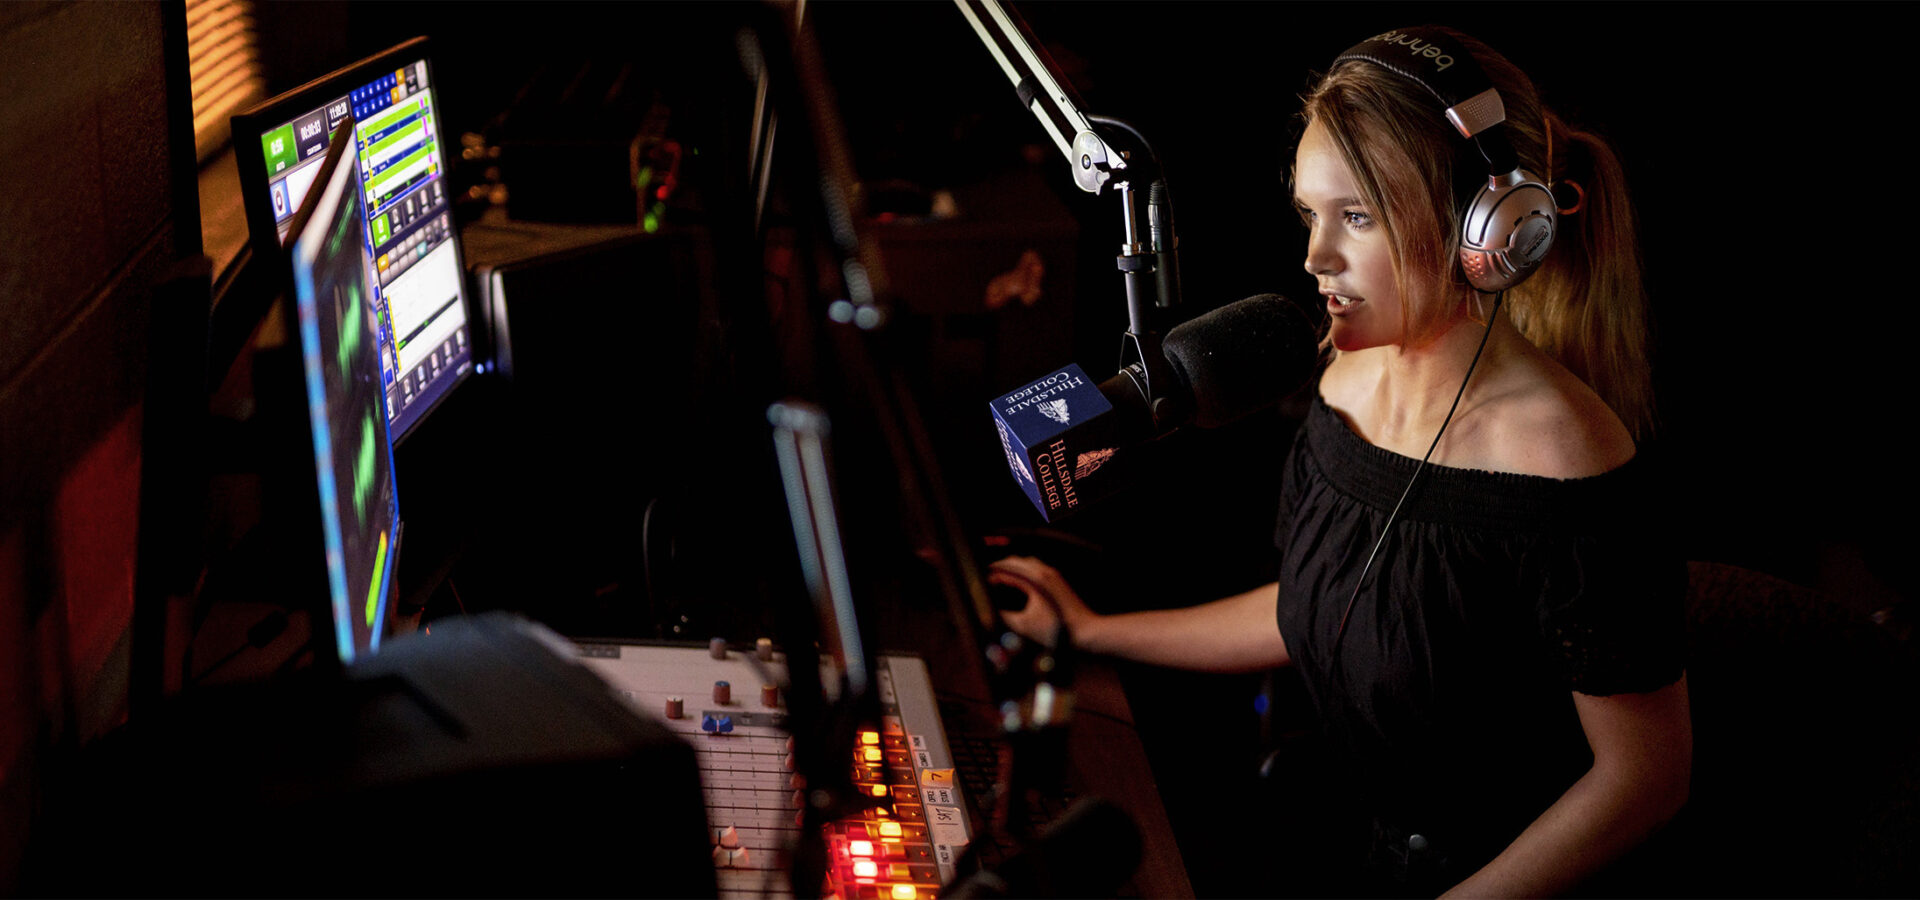 A Hillsdale journalist student speaking into a microphone in the Hillsdale broadcast studio